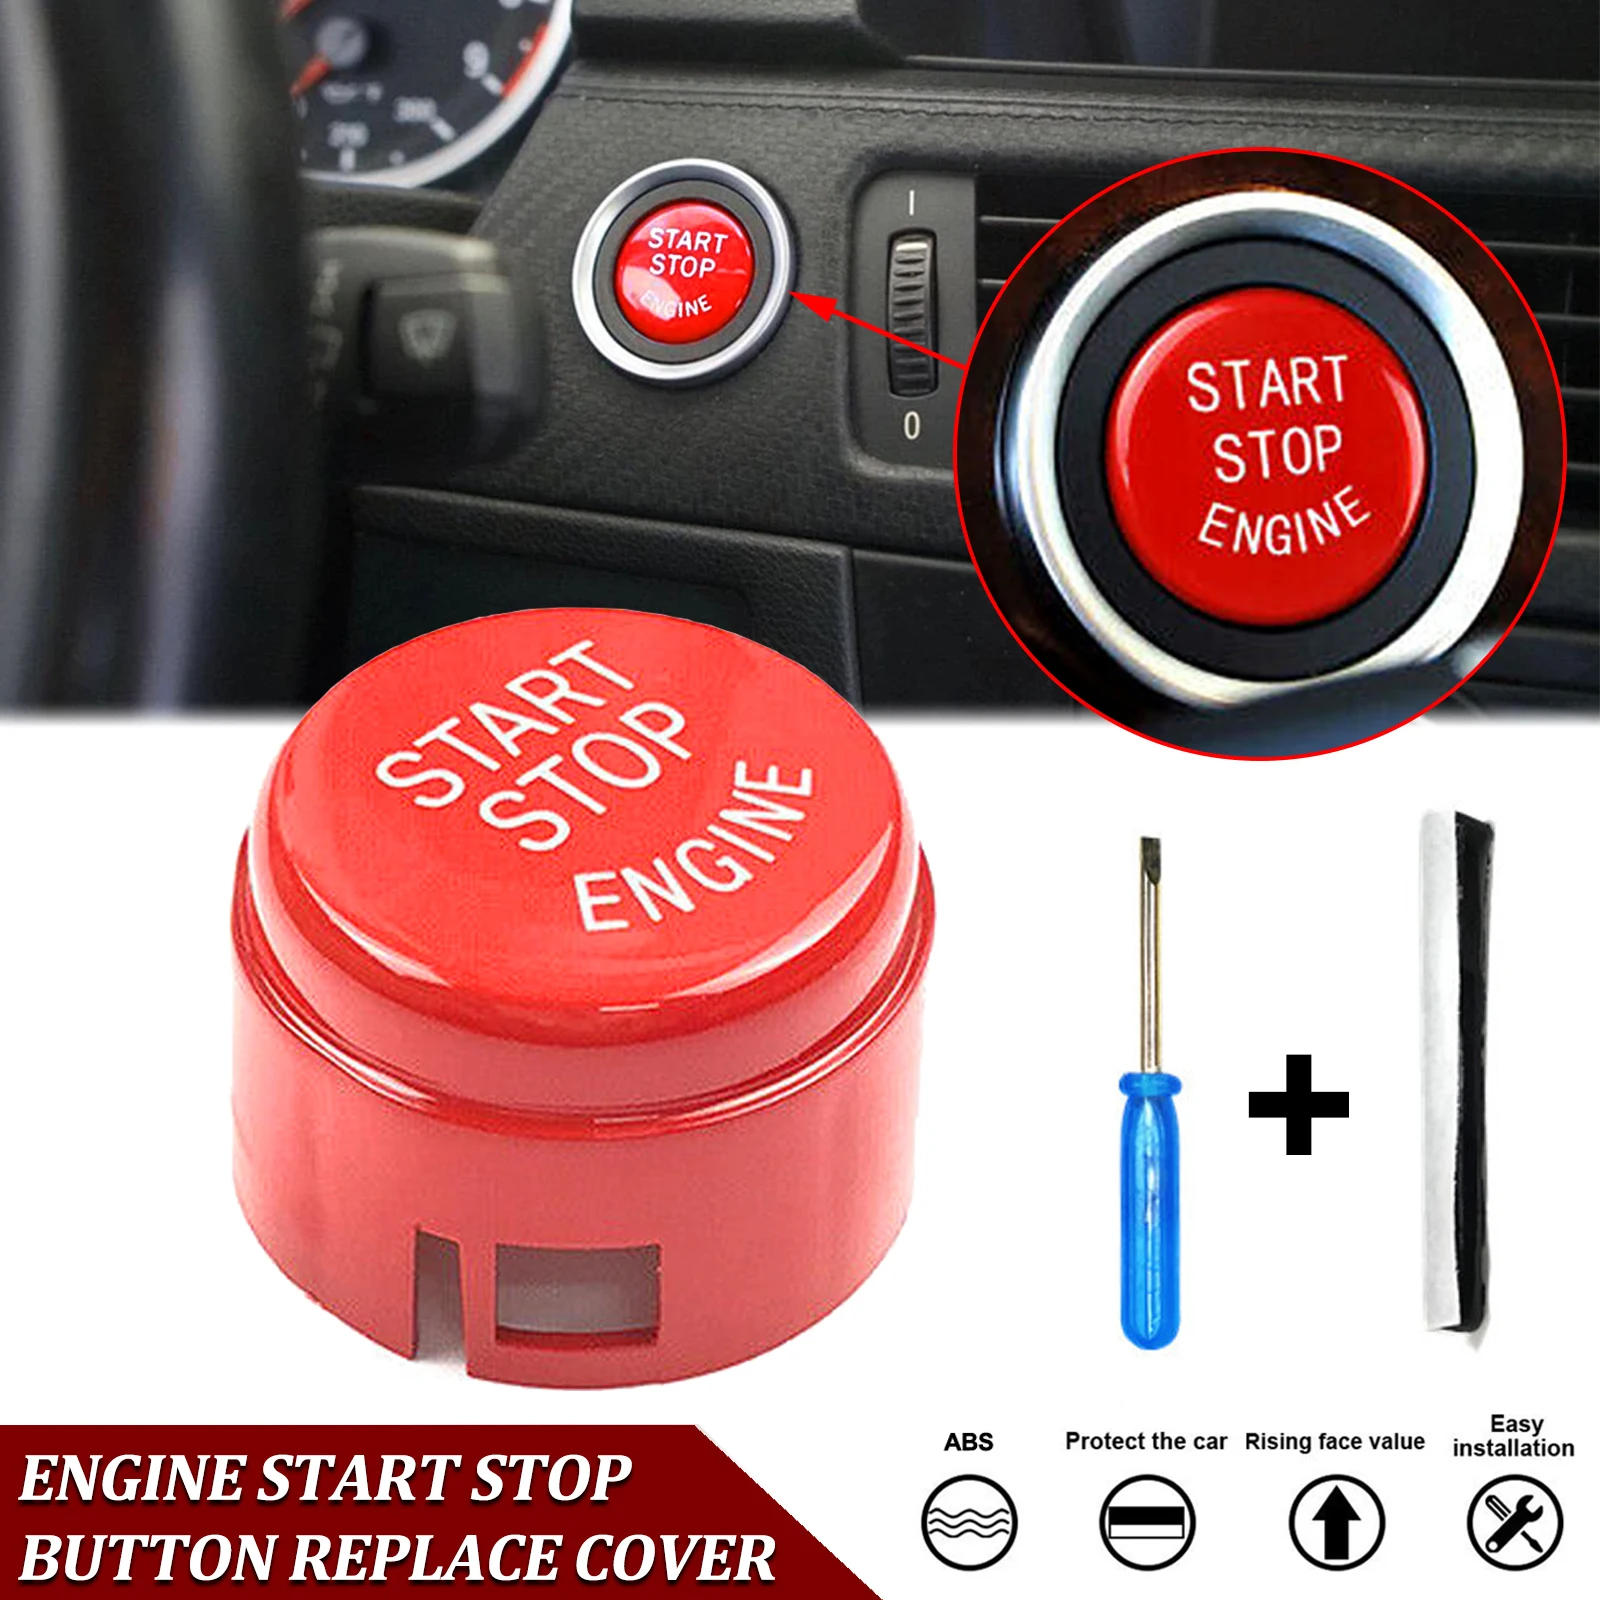 

Start Stop Button Engine Switch Cap Cover For BMW X1 X2 X3 X4 X5 X6 1 2 3 4 5 6 7 Series F20 F30 F10 W/O Auto Start-Stop (Red)